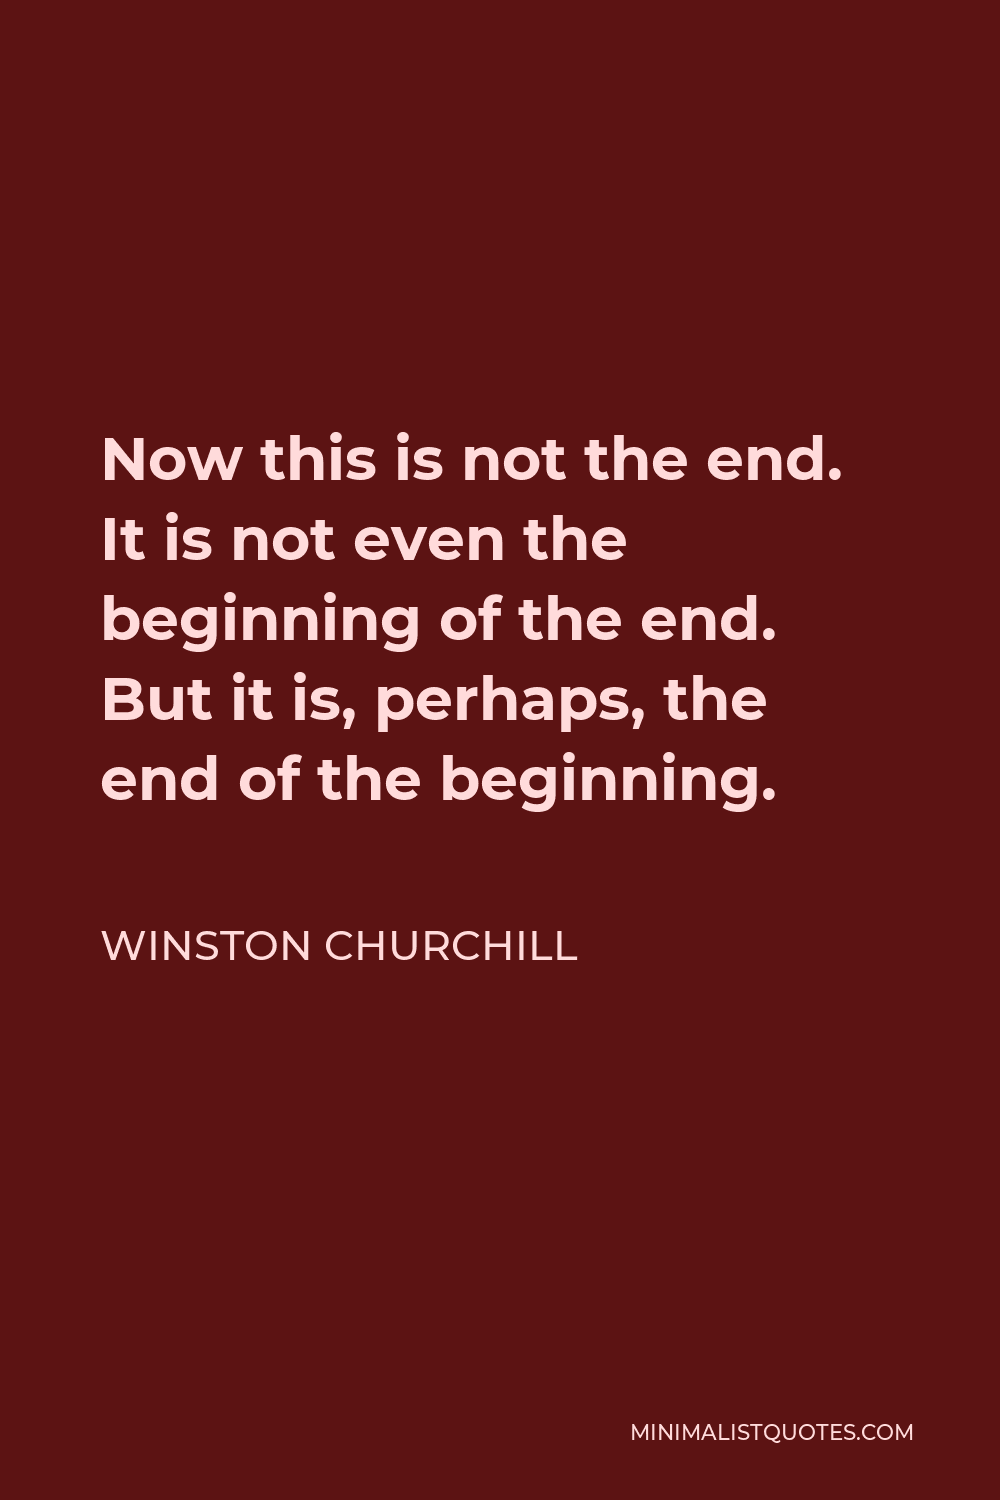 Winston Churchill Quote - Now this is not the end. It is not even the beginning of the end. But it is, perhaps, the end of the beginning.